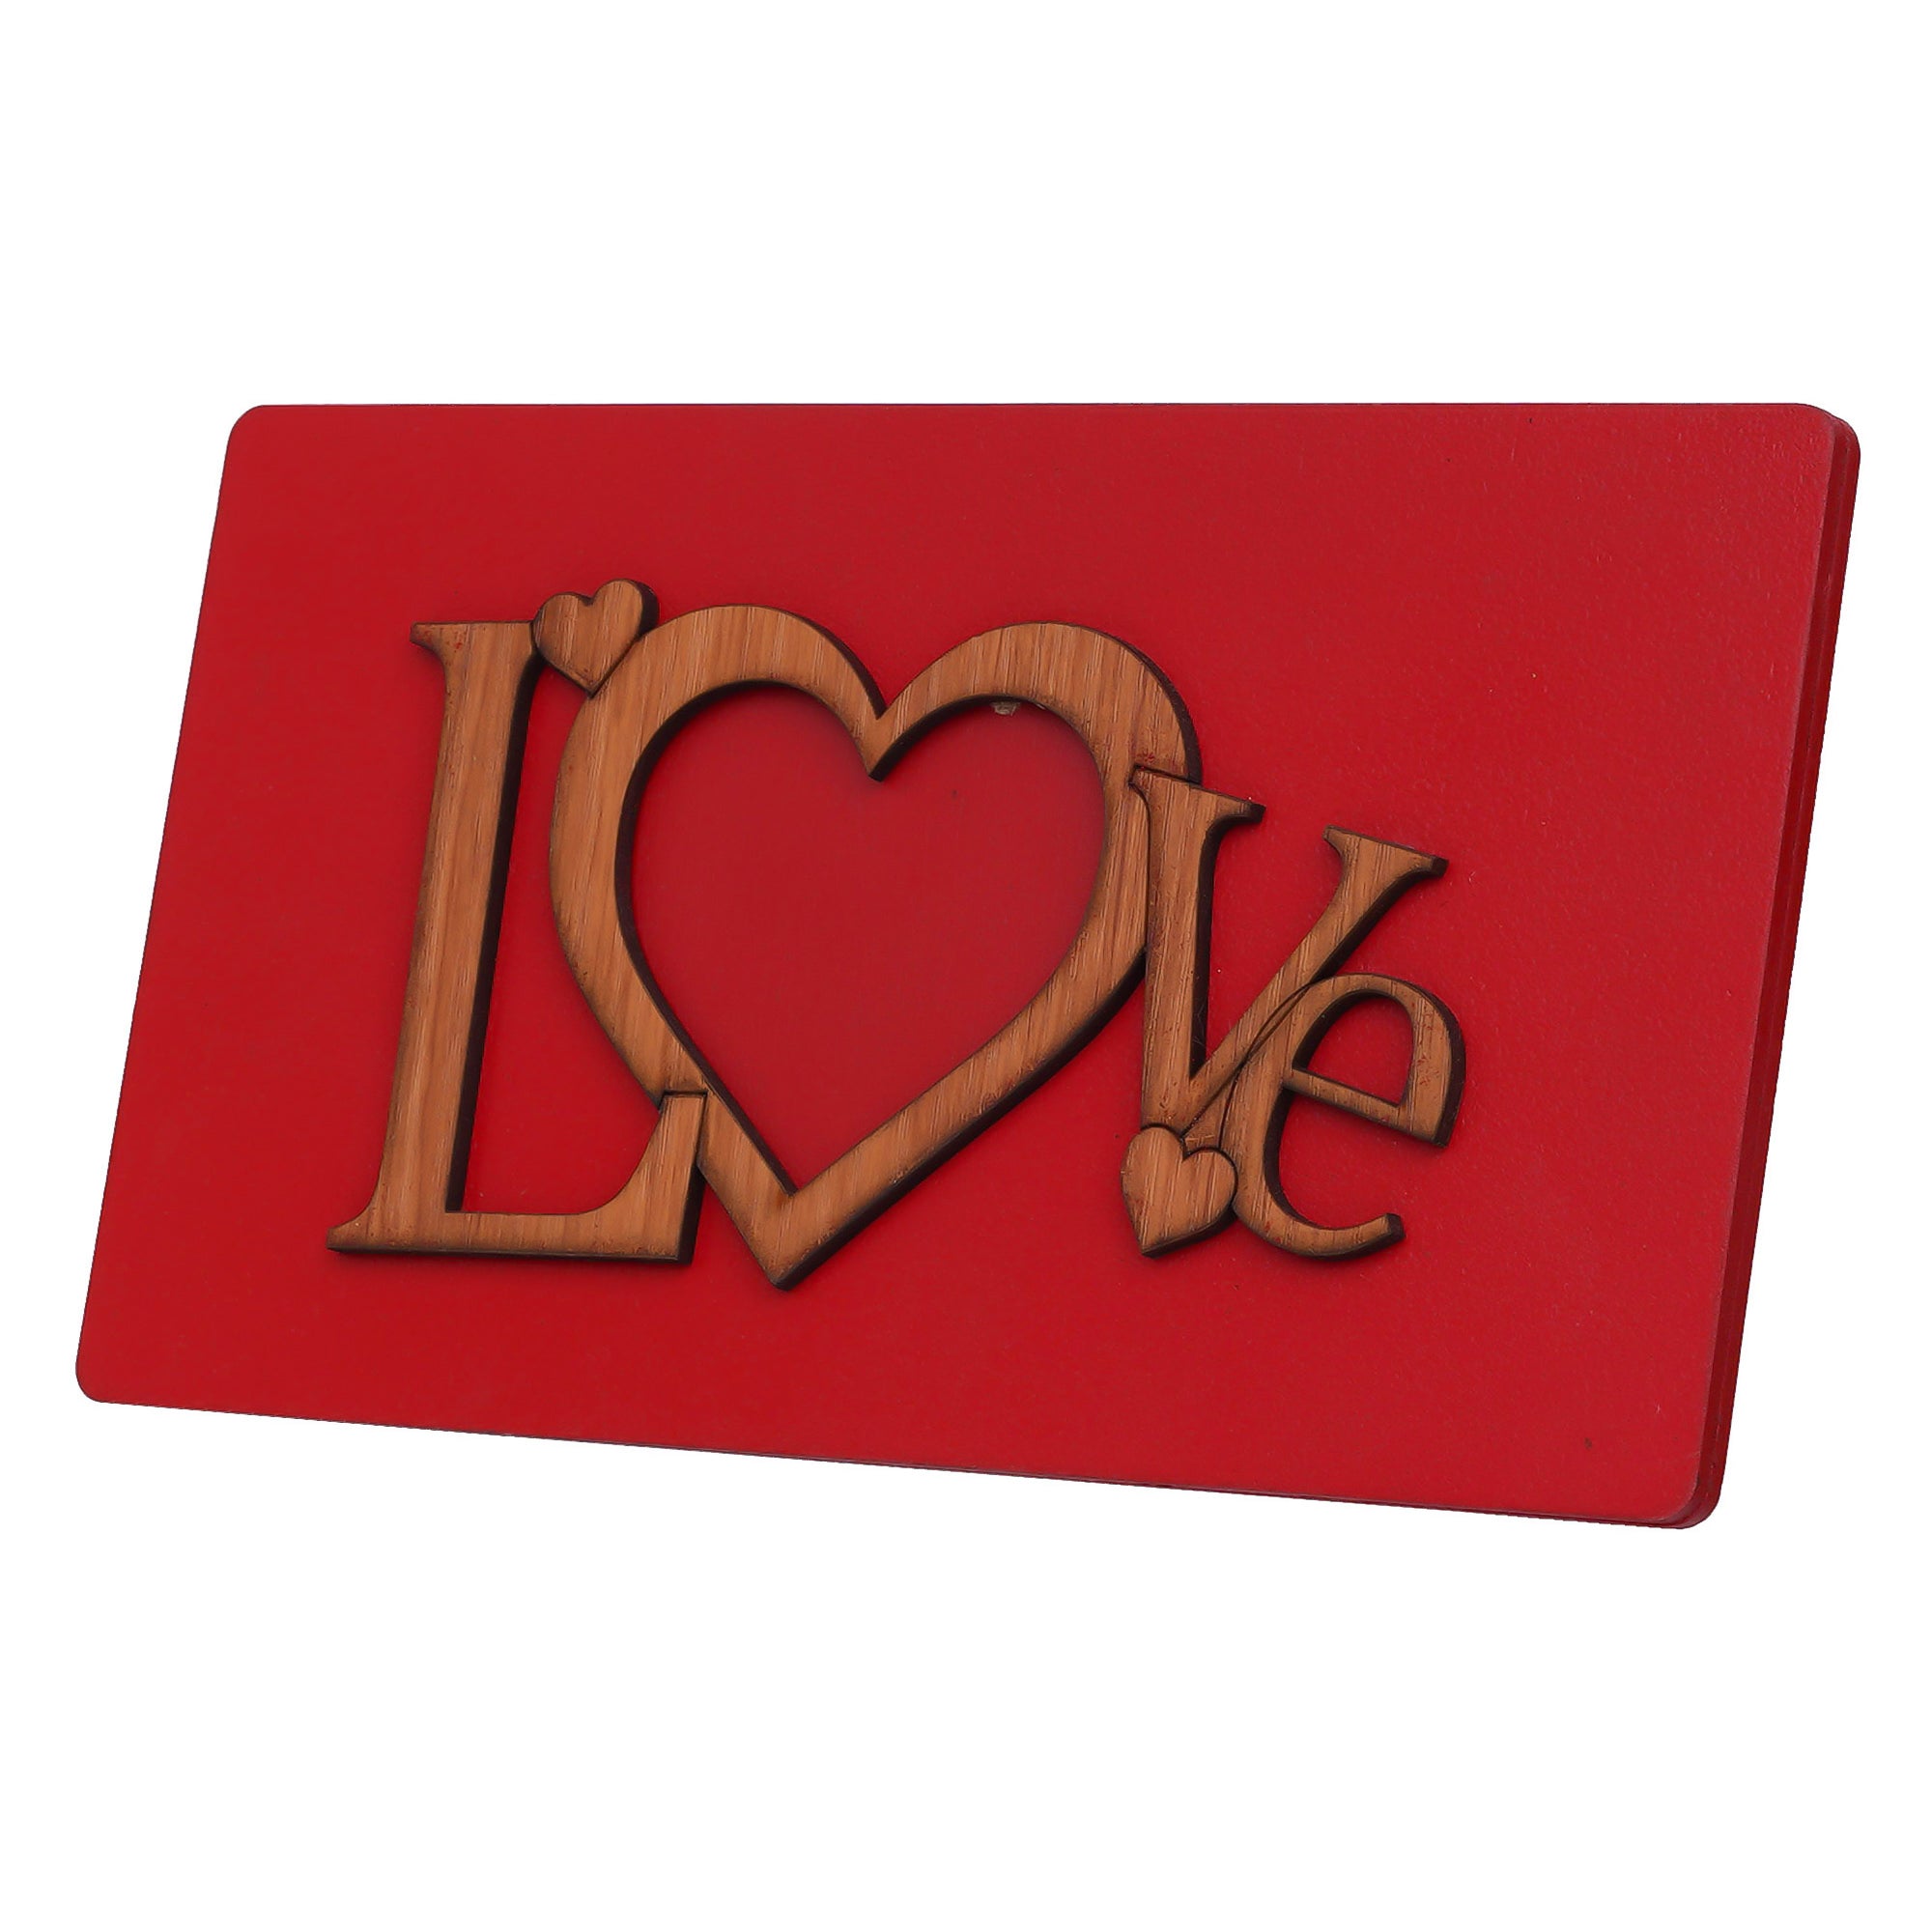 Valentine Combo of "Love" Wooden Photo Frame With Red Stand, Bride Kissing Groom Romantic Polyresin Decorative Showpiece 7